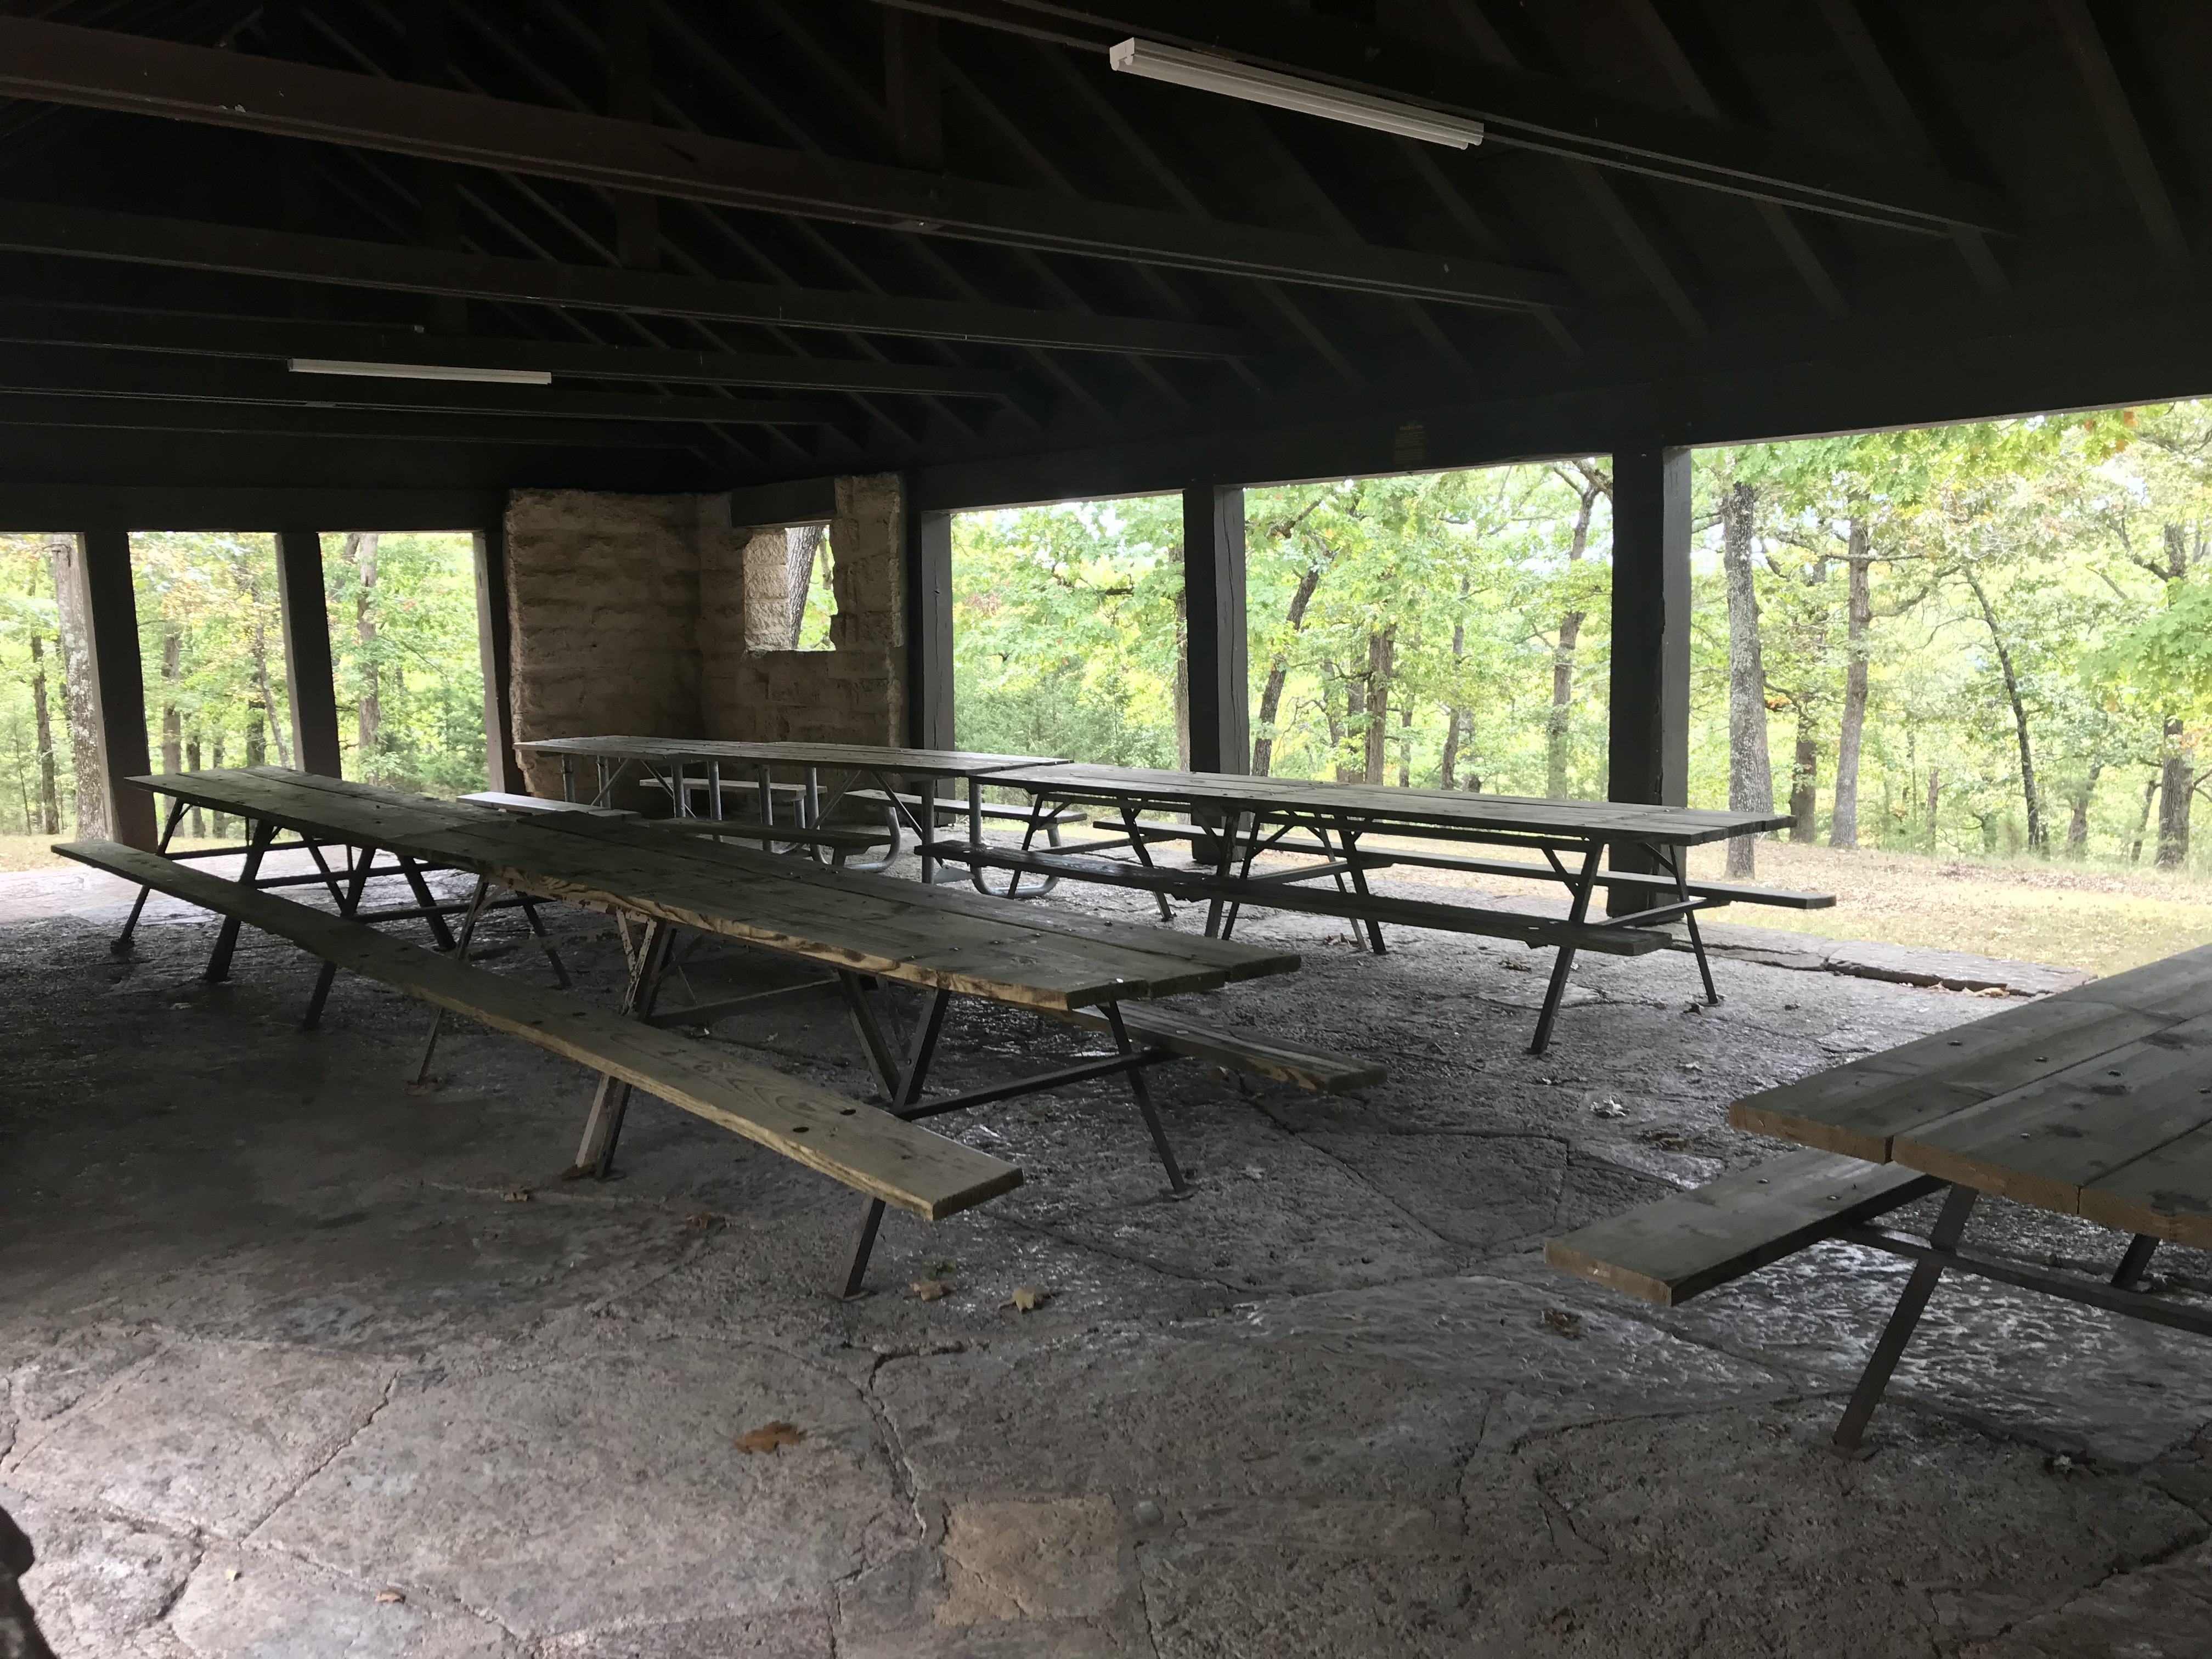 Picnic tables on stone floor inside the open picnic shelter